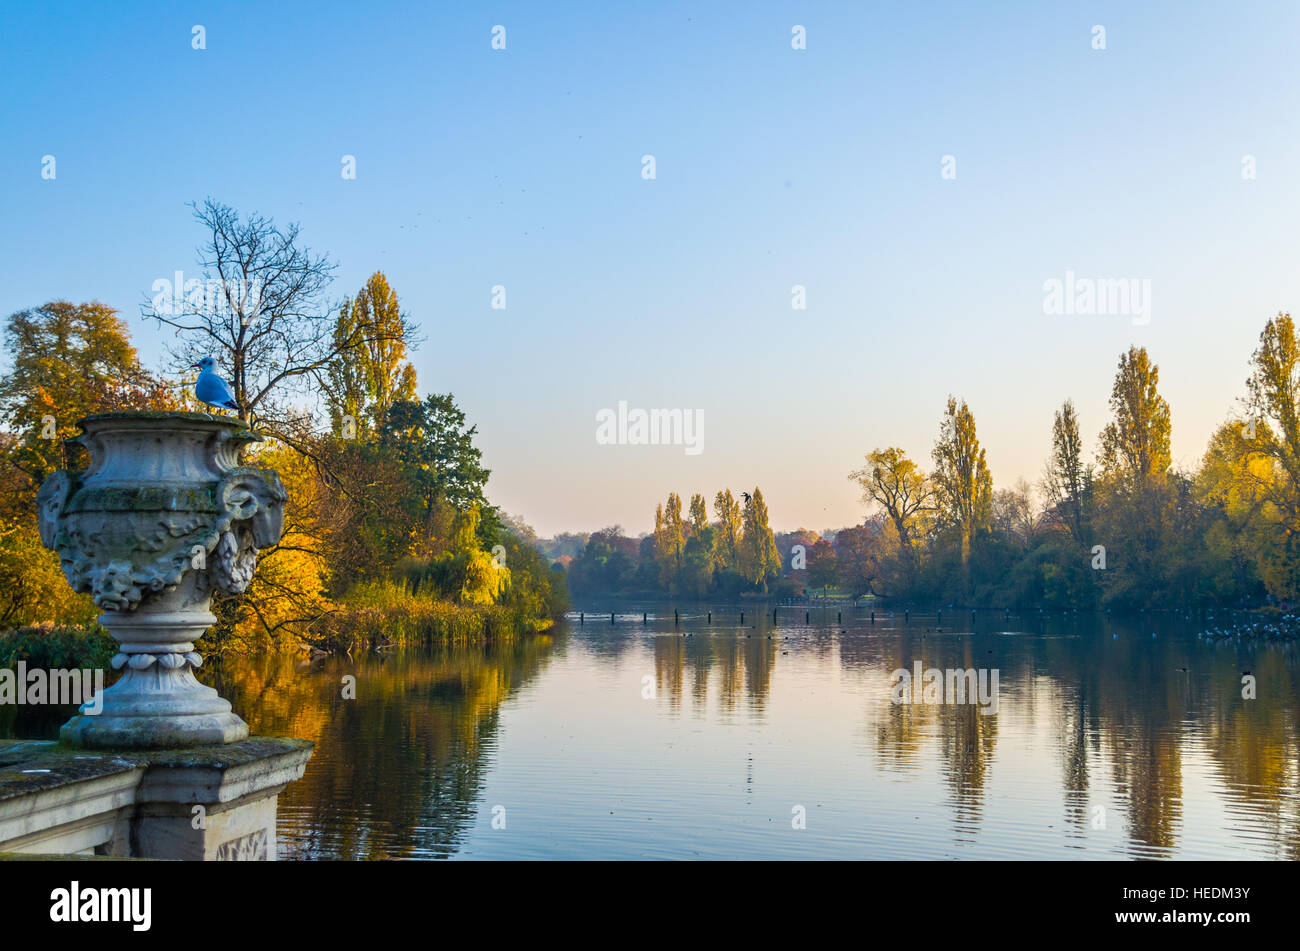 A bird takes in the autumnal sight of the Serpentine Lake at Hyde Park in London Stock Photo